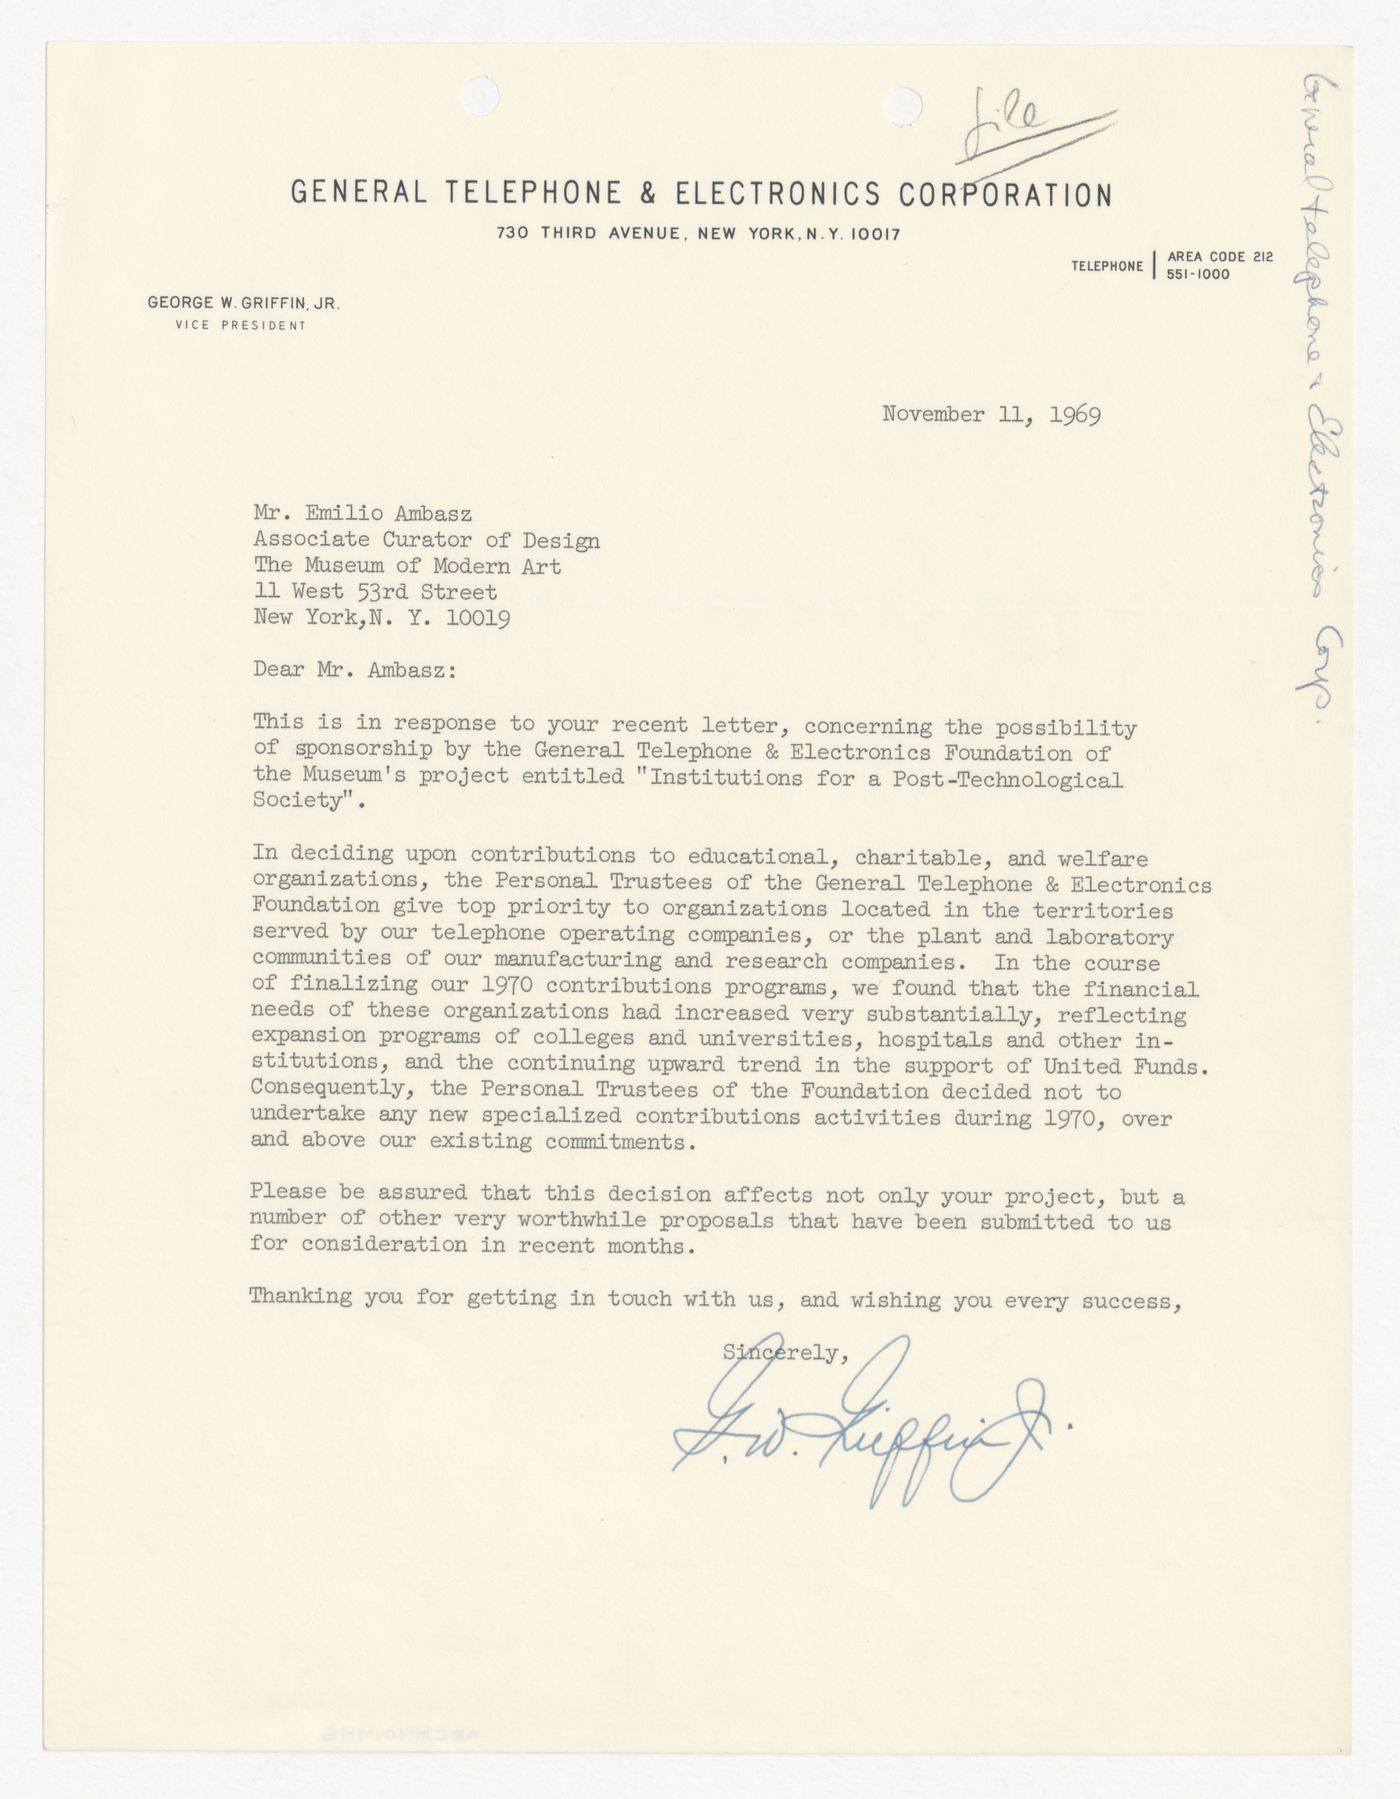 Letter from George W. Griffin Jr. to Emilio Ambasz responding to proposal for Institutions for a Post-Technological Society conference